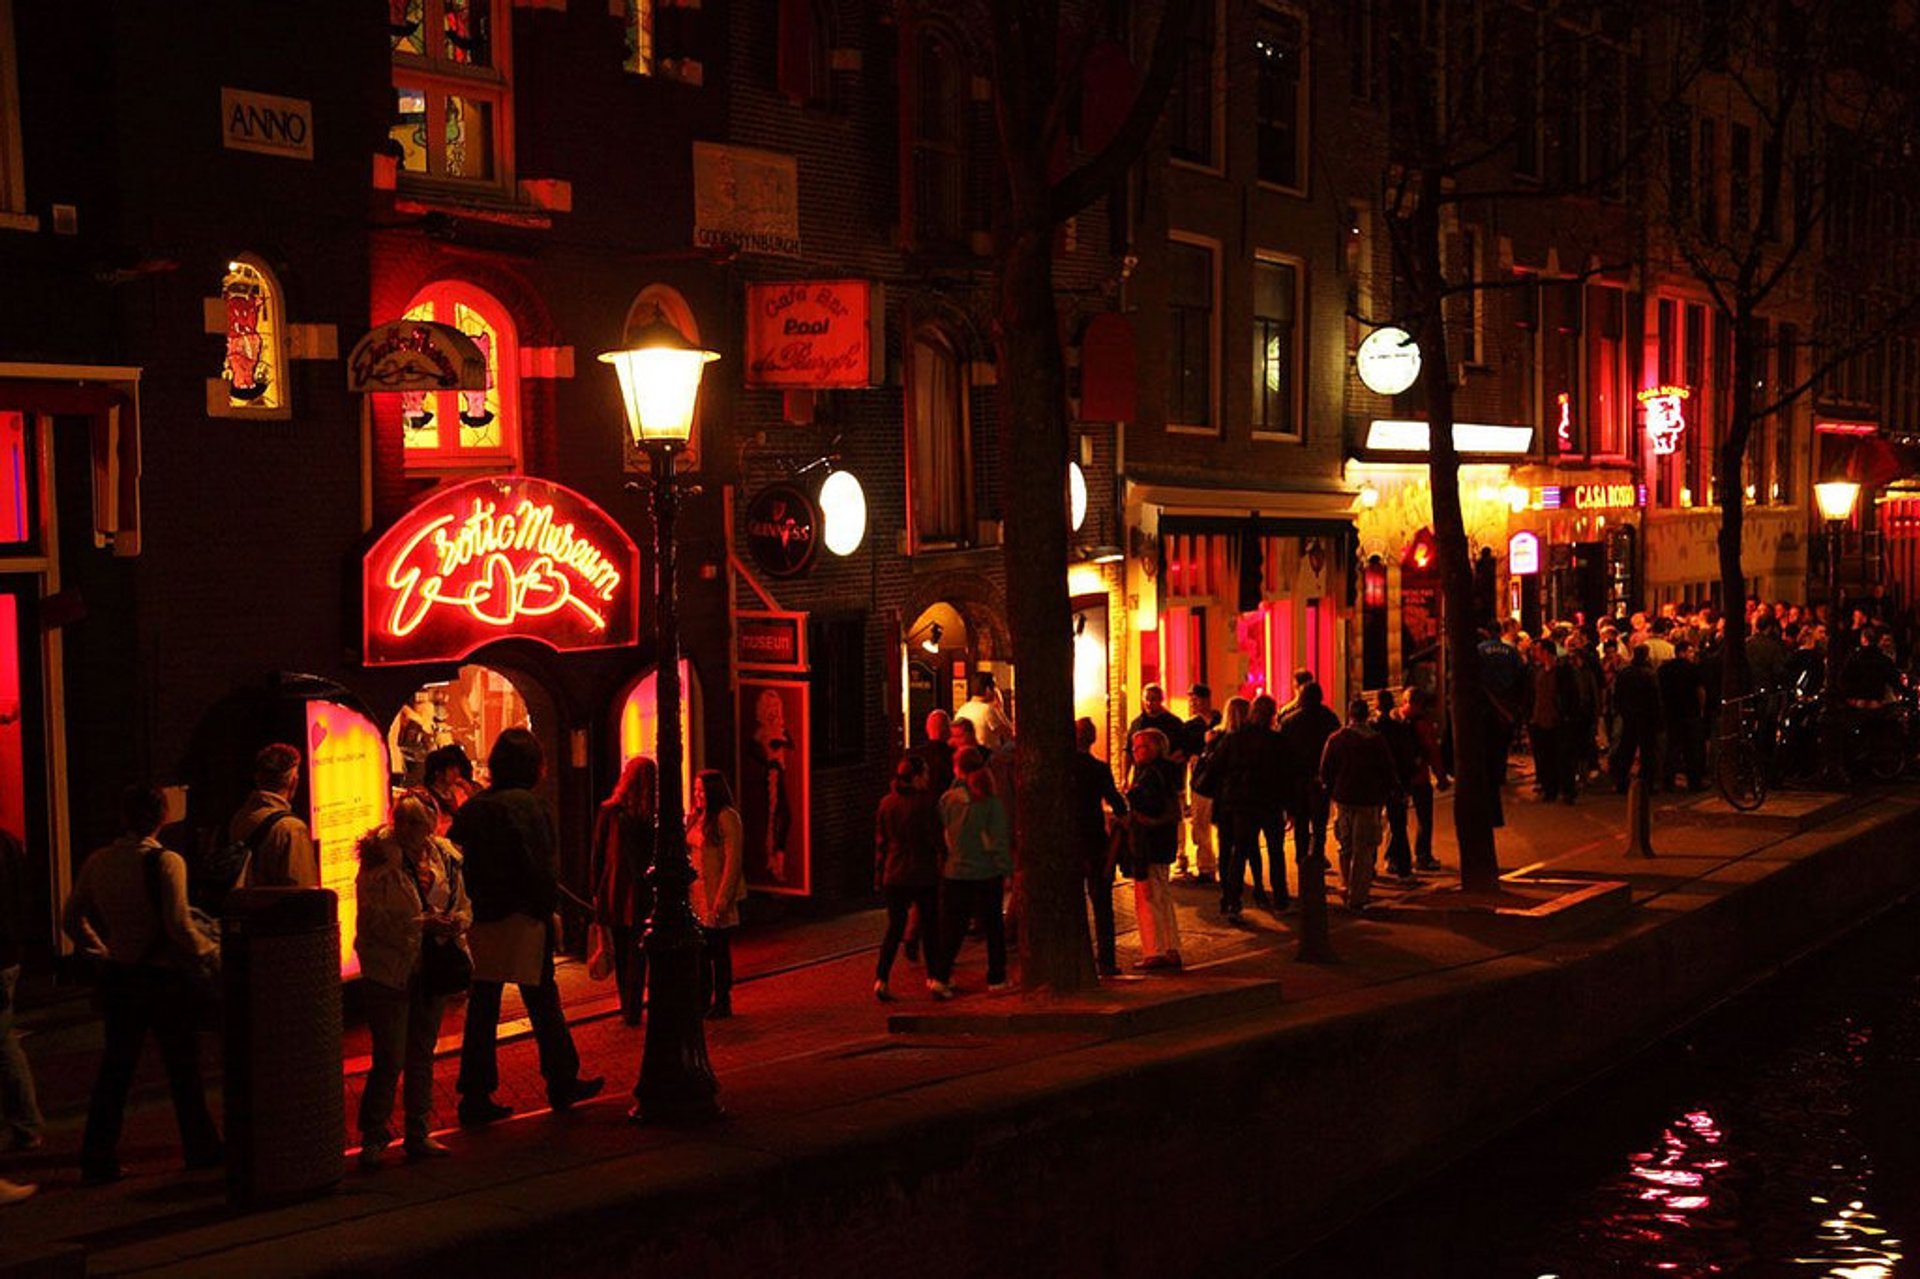 synge Terapi krig Best time for Red Light District in Amsterdam 2023 - Best Season